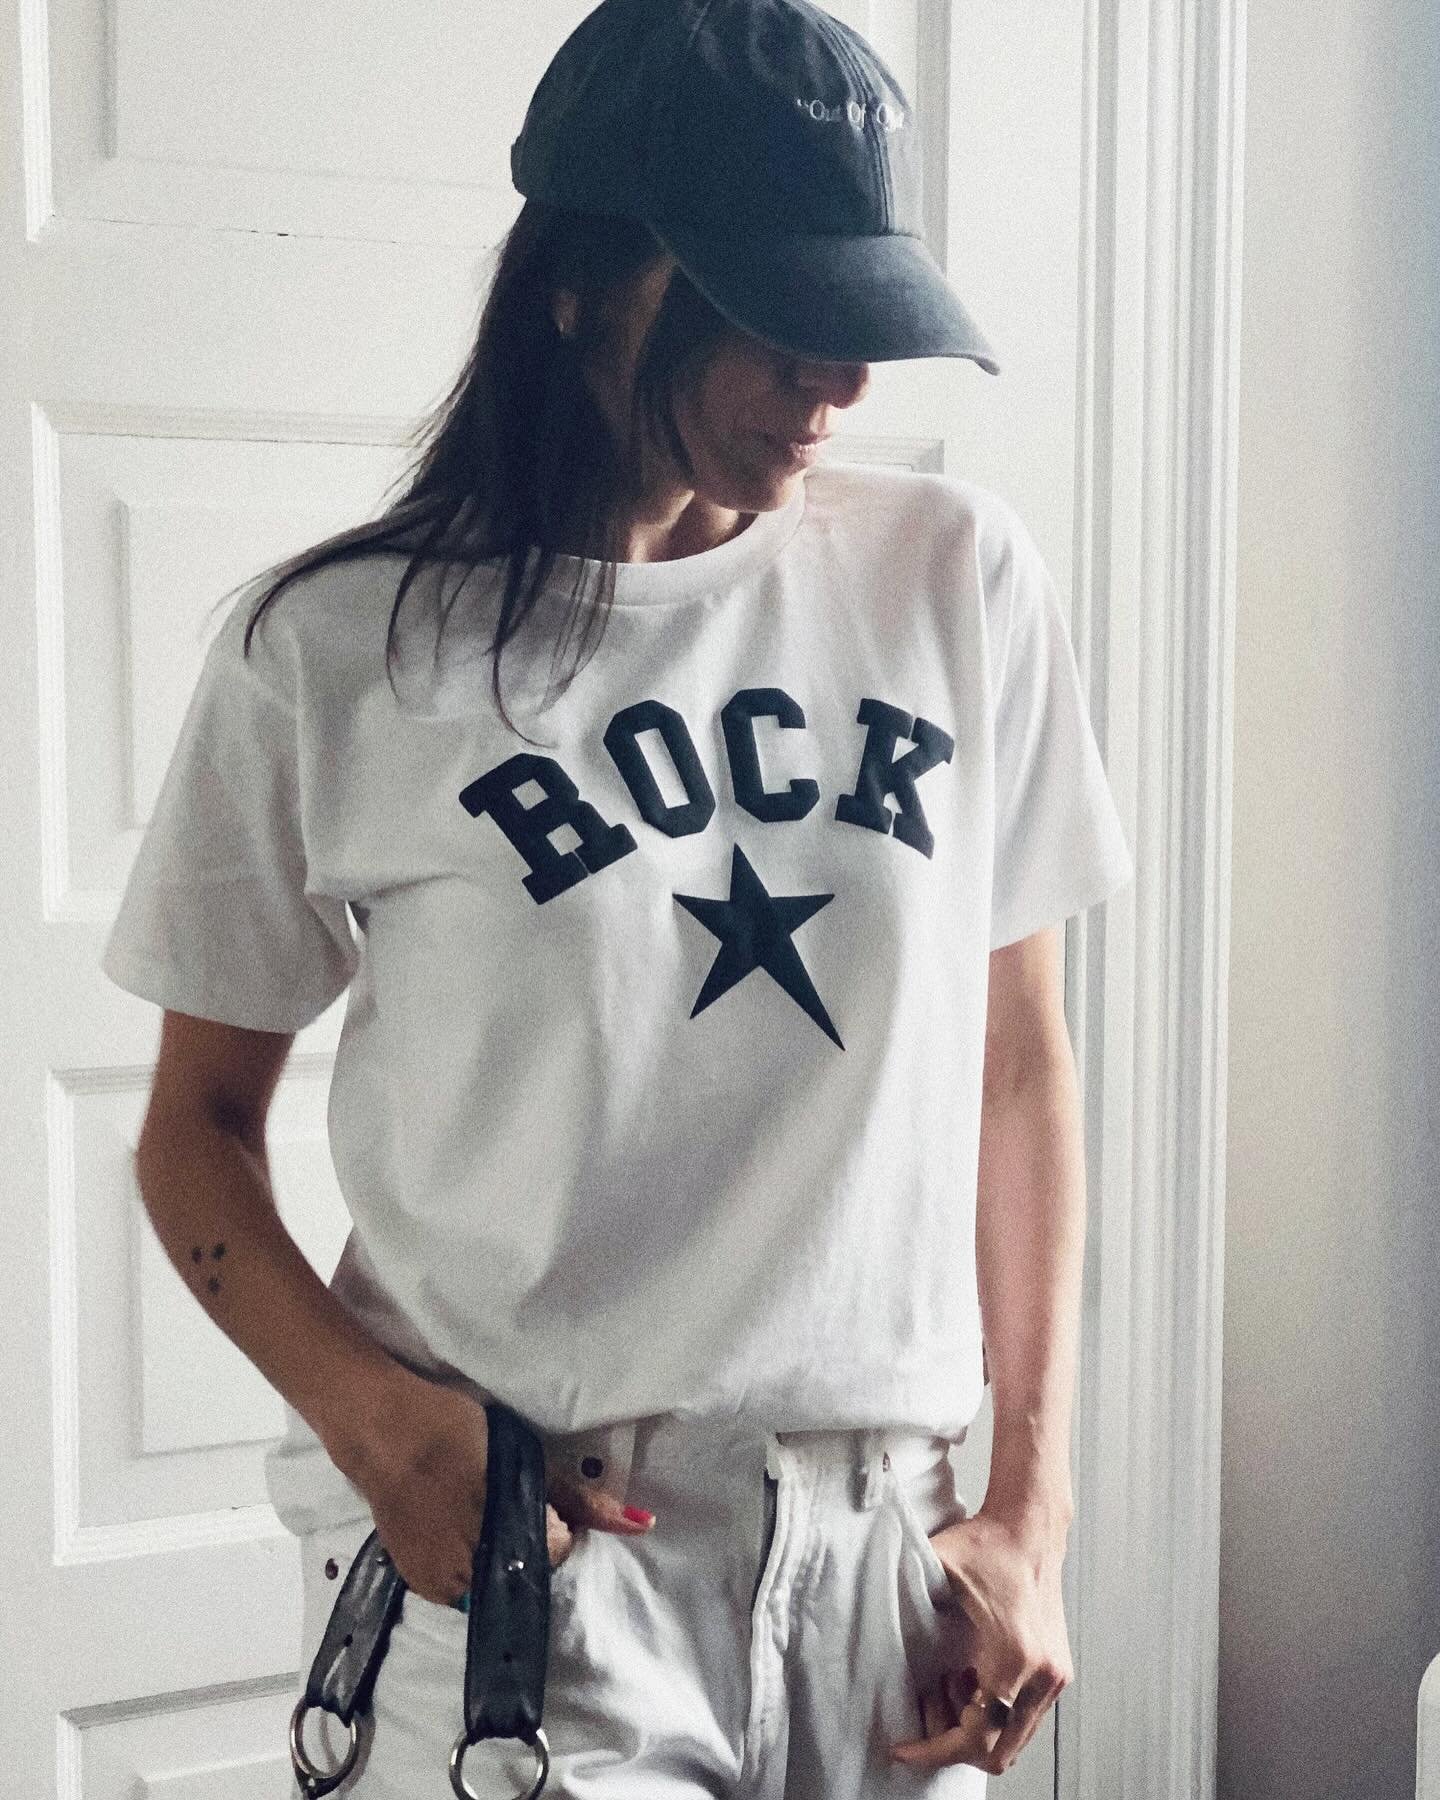 Rock Star Icon // Puff Print available in three styles / T-shirt / Muscle Tank / Crop @fortheloveofrockstars #rock #star #icon #whitetshirt #fortheloveofrockstars #whatiamwearingtoday #whitetshirtstyle #styleinspo